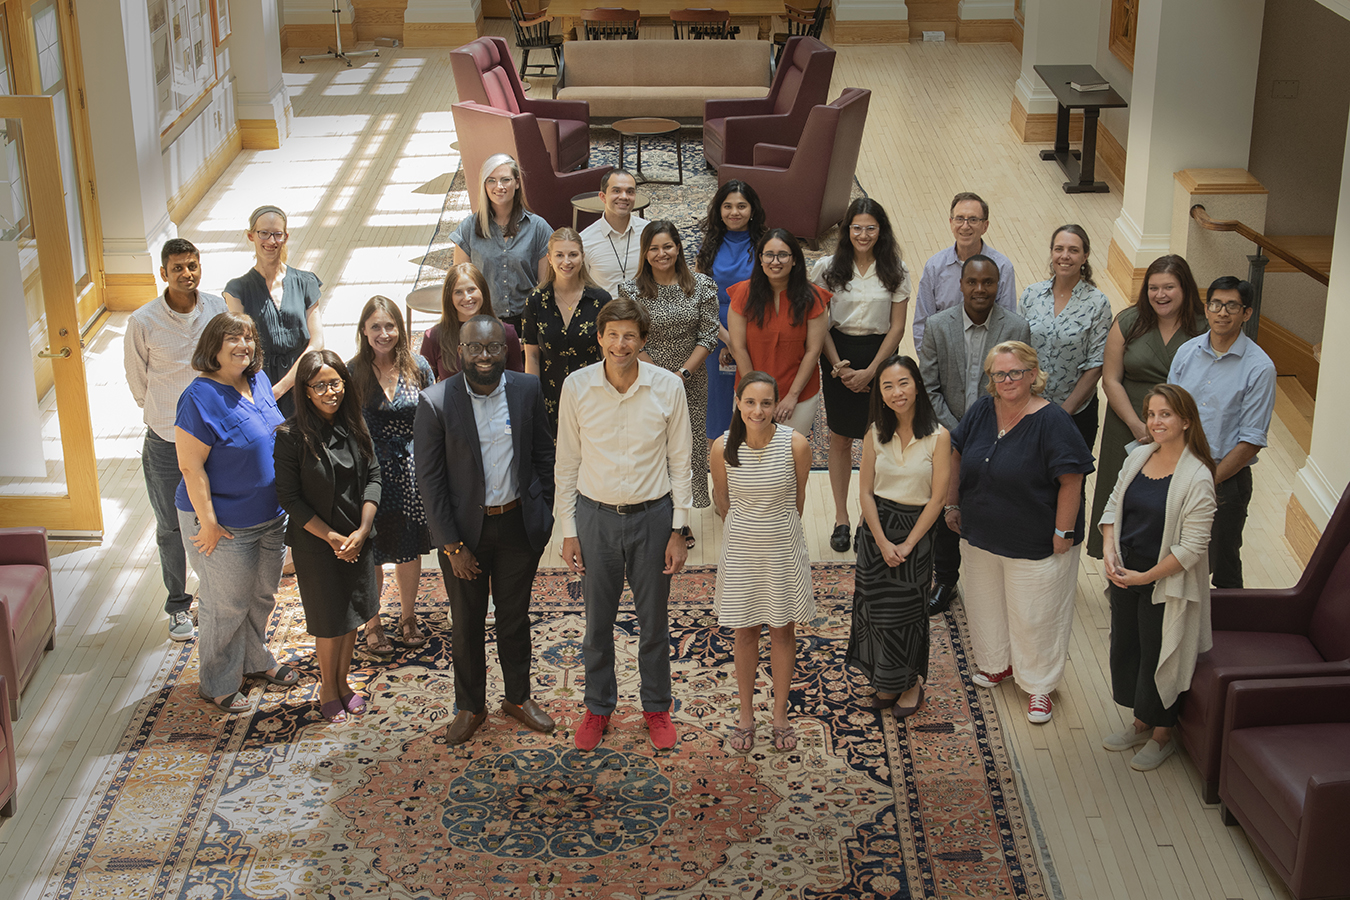 Staff from the Center for Integration Science in global health equity gathered in November 2022 to celebrate the center’s launch during an inaugural symposium. Dr. Gene Bukhman is center front.